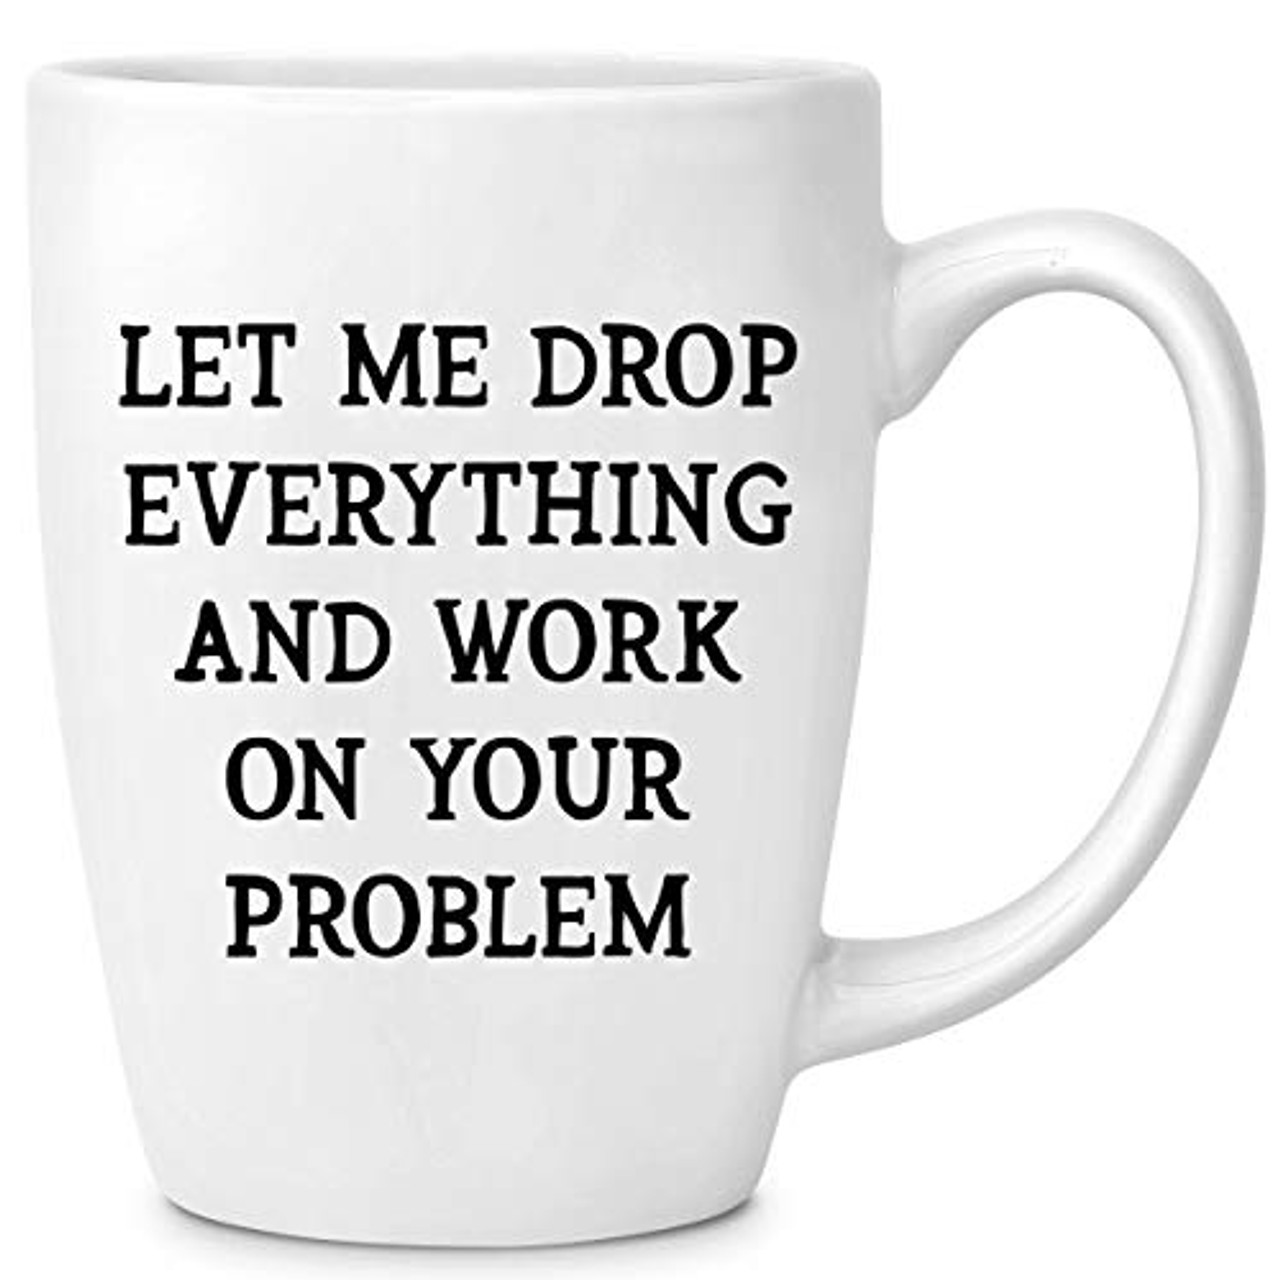 Let Me Drop Everything And Work On Your Problem Unique Mugs Cups Gift Presents 16 oz Red Bistro Coffee Mug Best Gift Ideas for Mom Dad Wife Husband Coworker Boss Friend Funny Novelty Present 